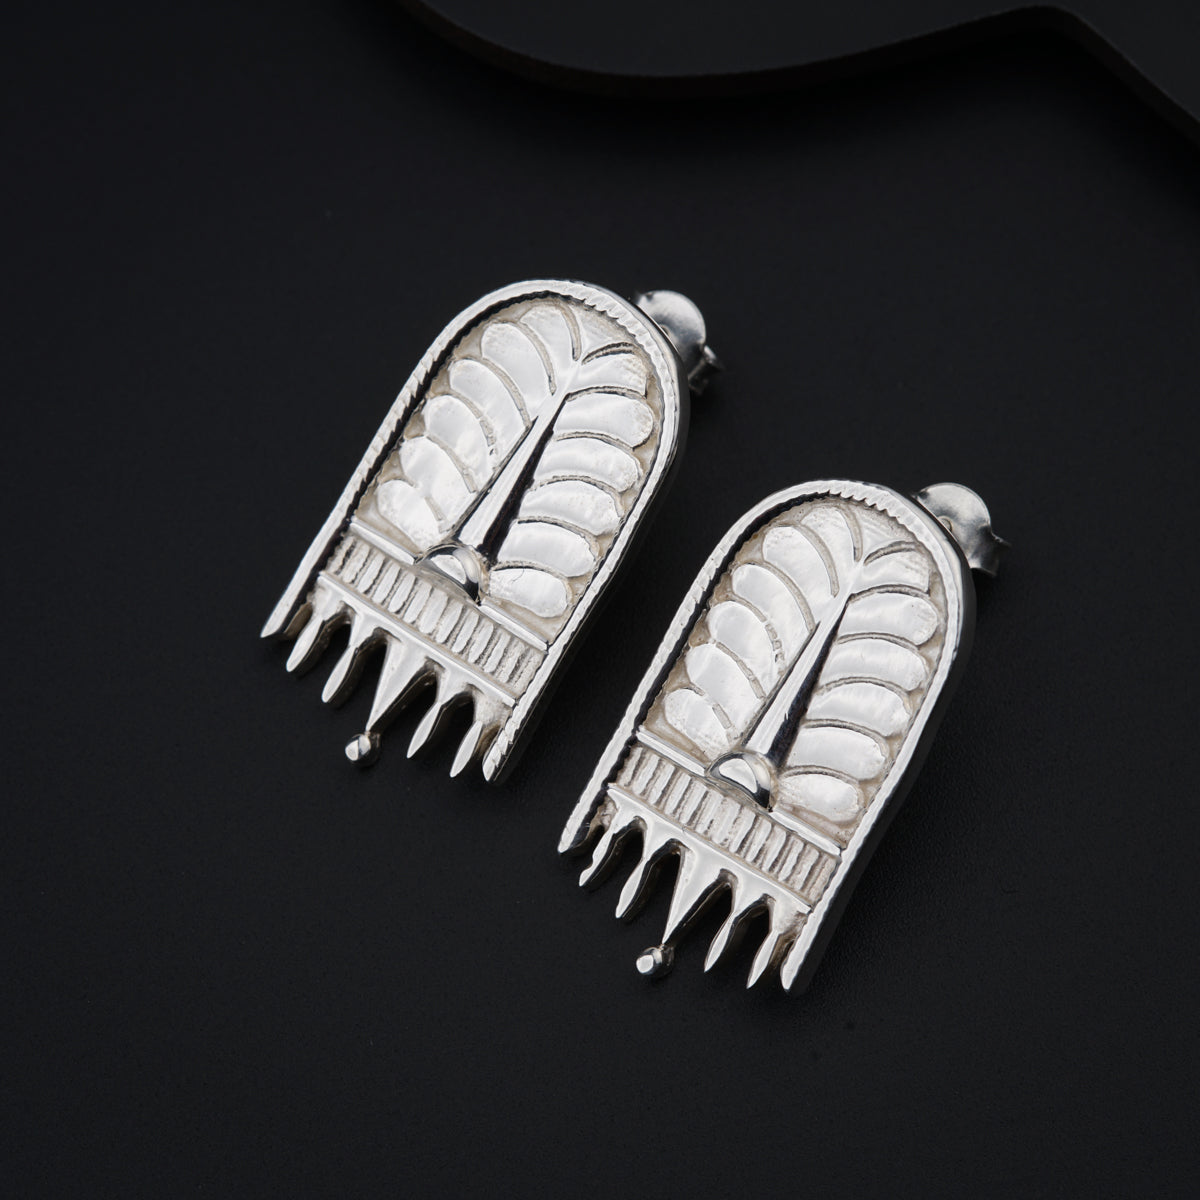 a pair of silver colored earrings on a black surface